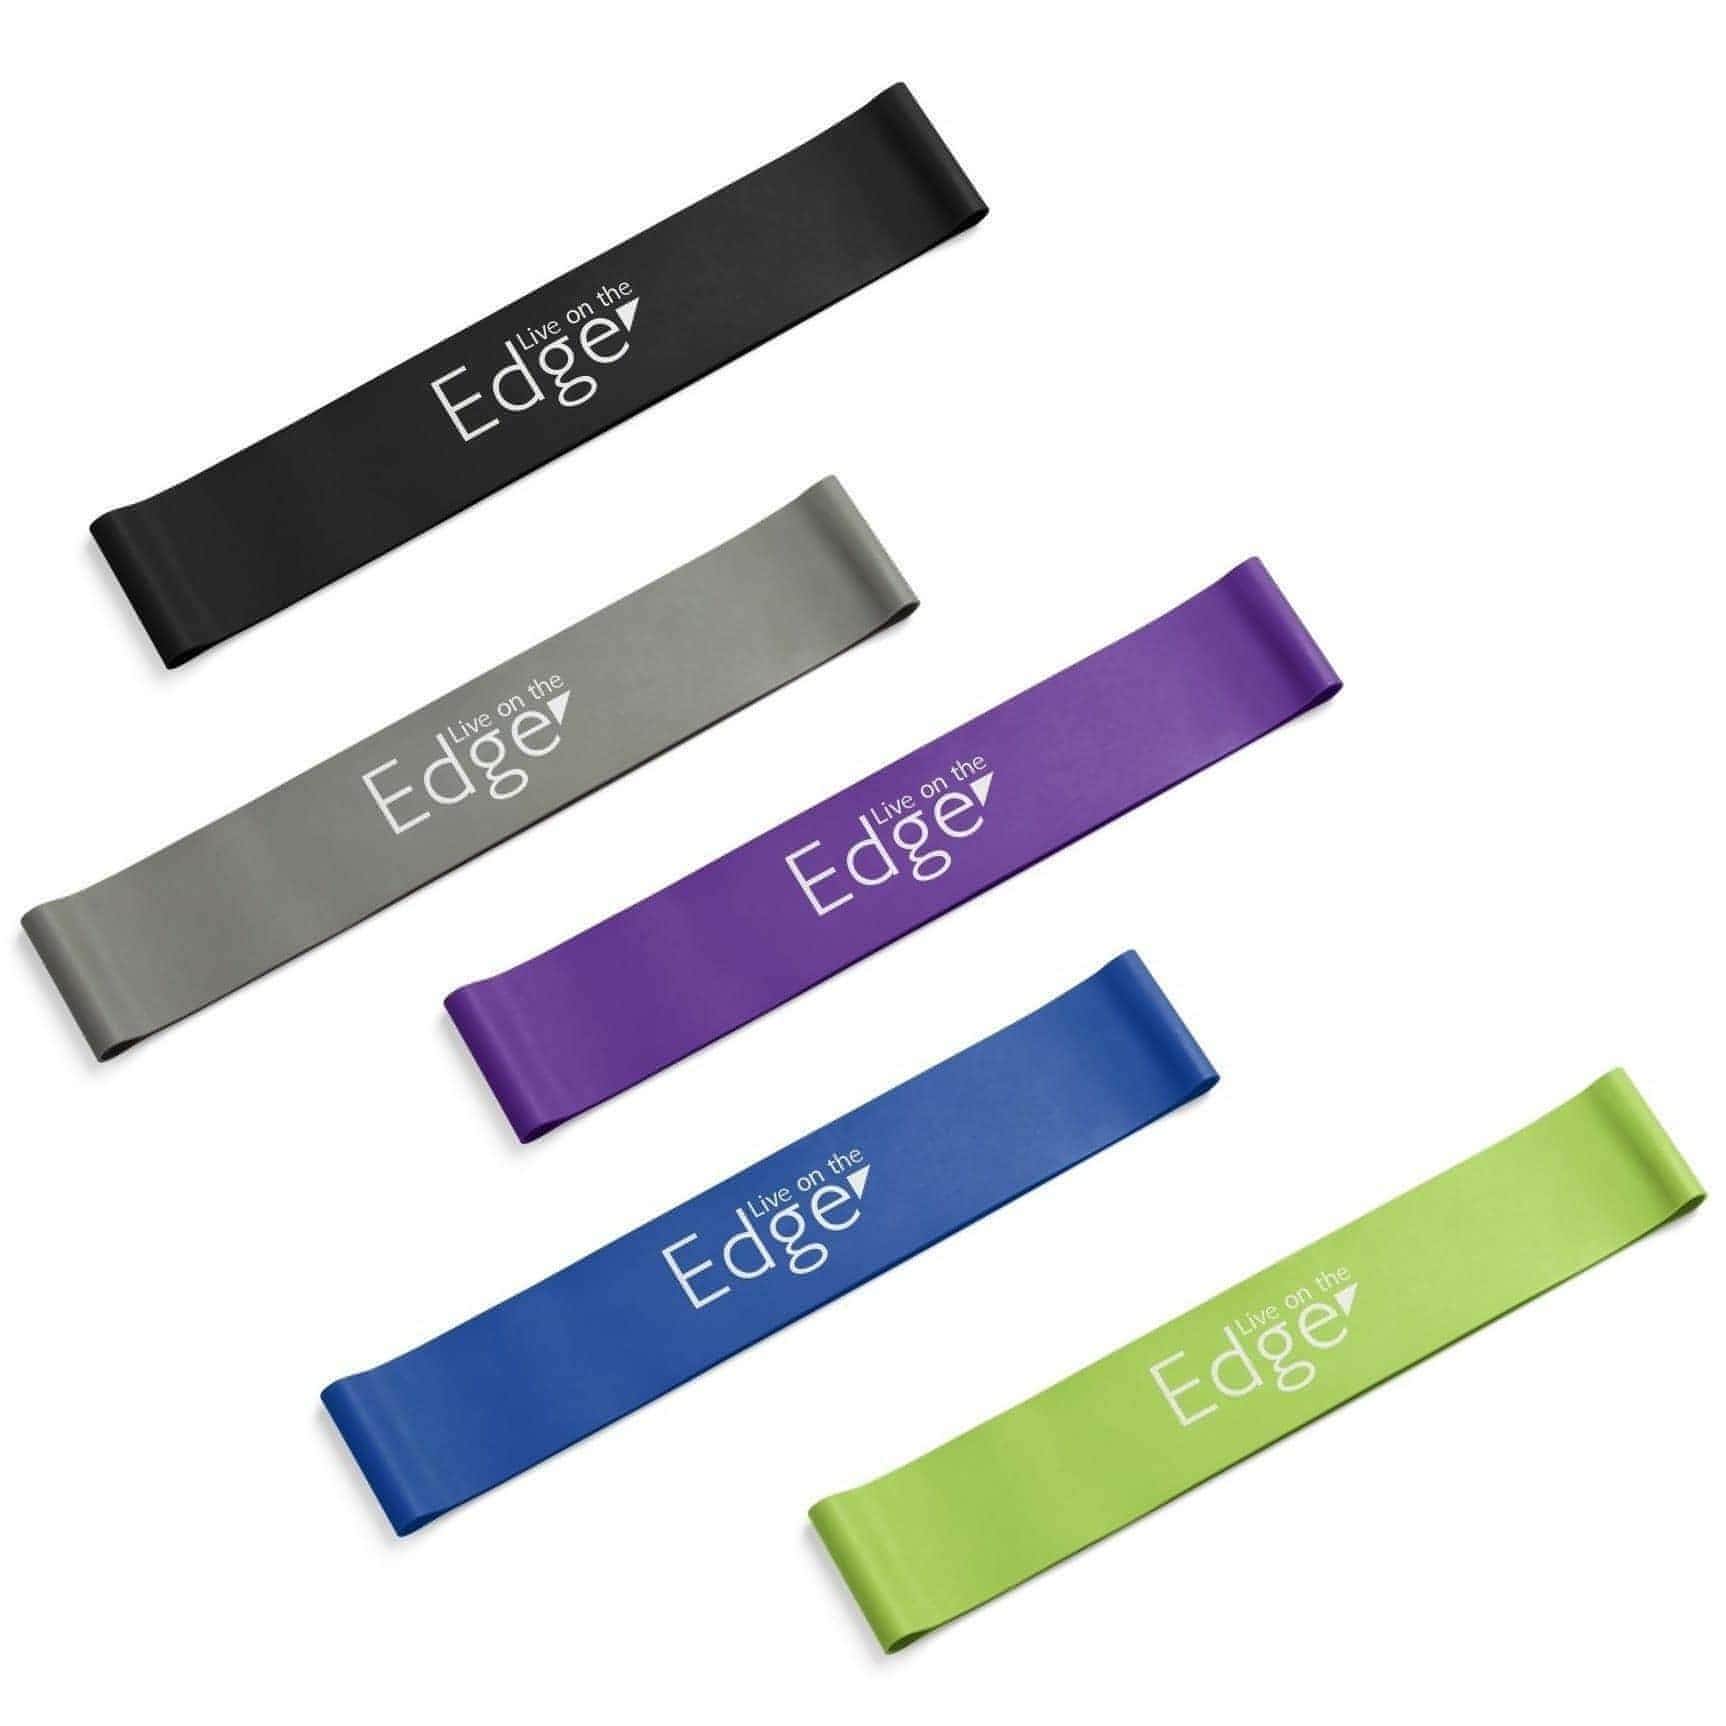 Live on the Edge 5 Pack Loop Resistance Bands - Multi 700461661429 - Start Fitness